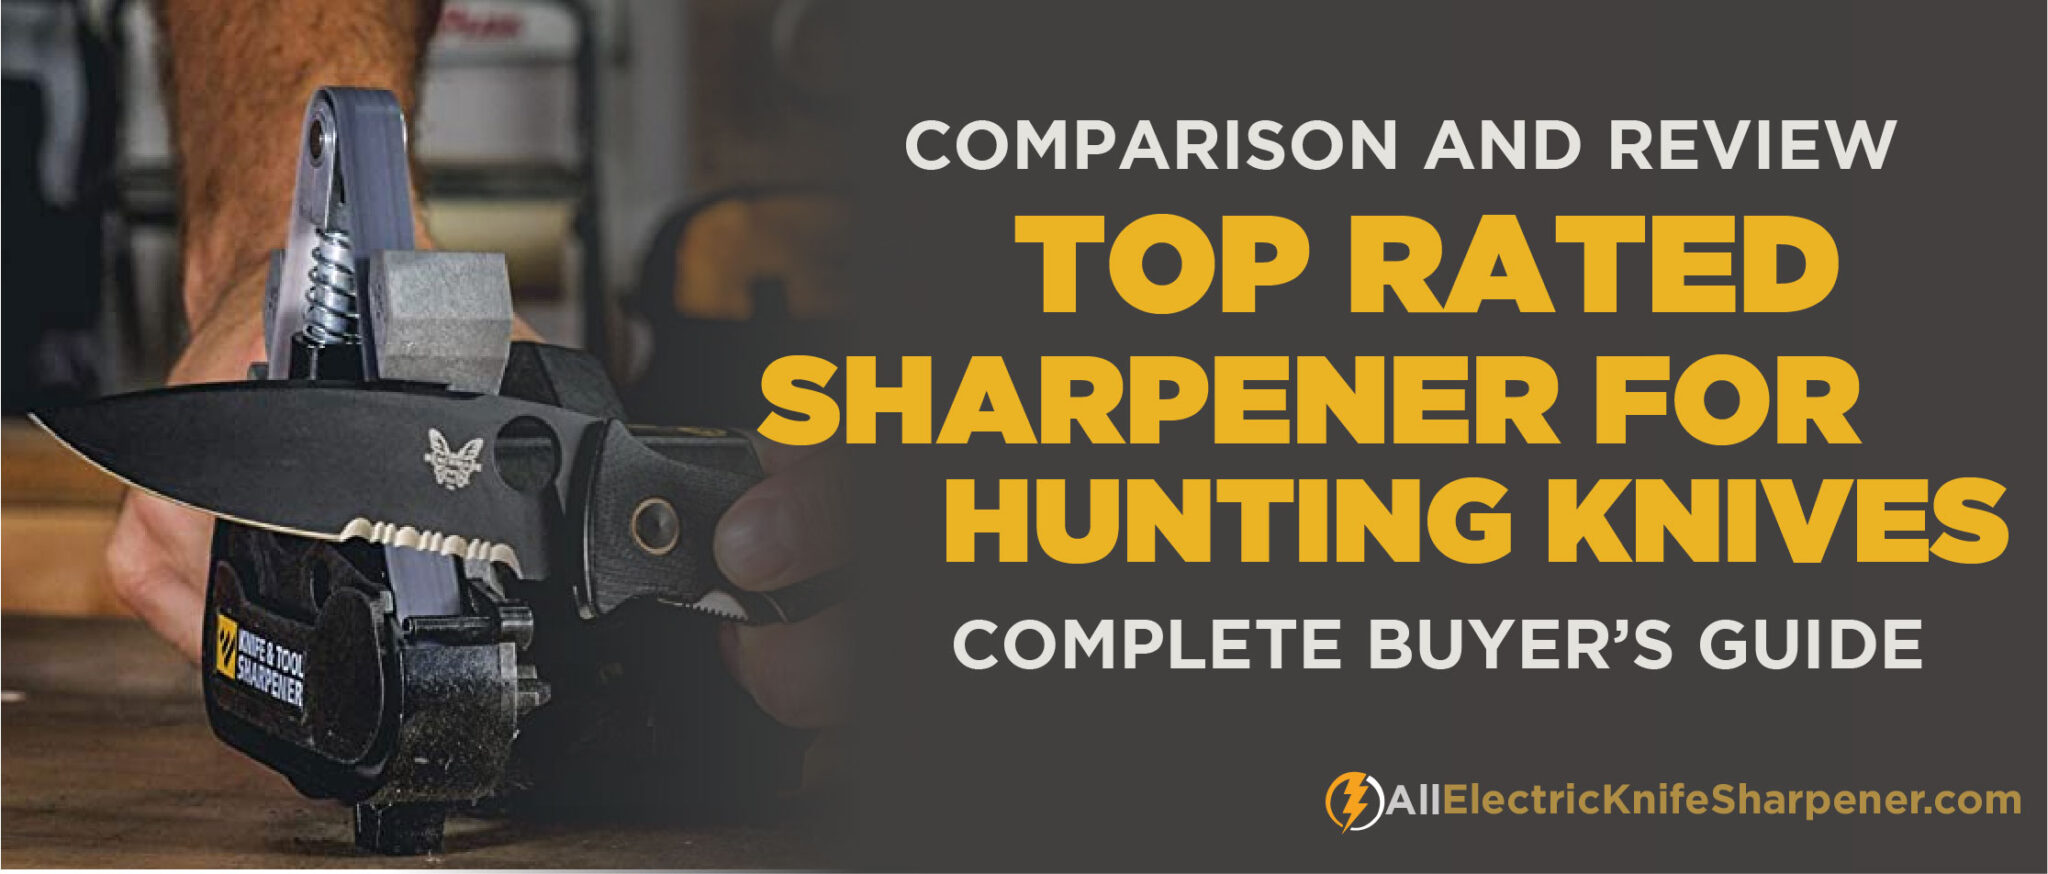 Best Electric Knife Sharpener for Hunting Knives - Detailed Review & Buying Guide